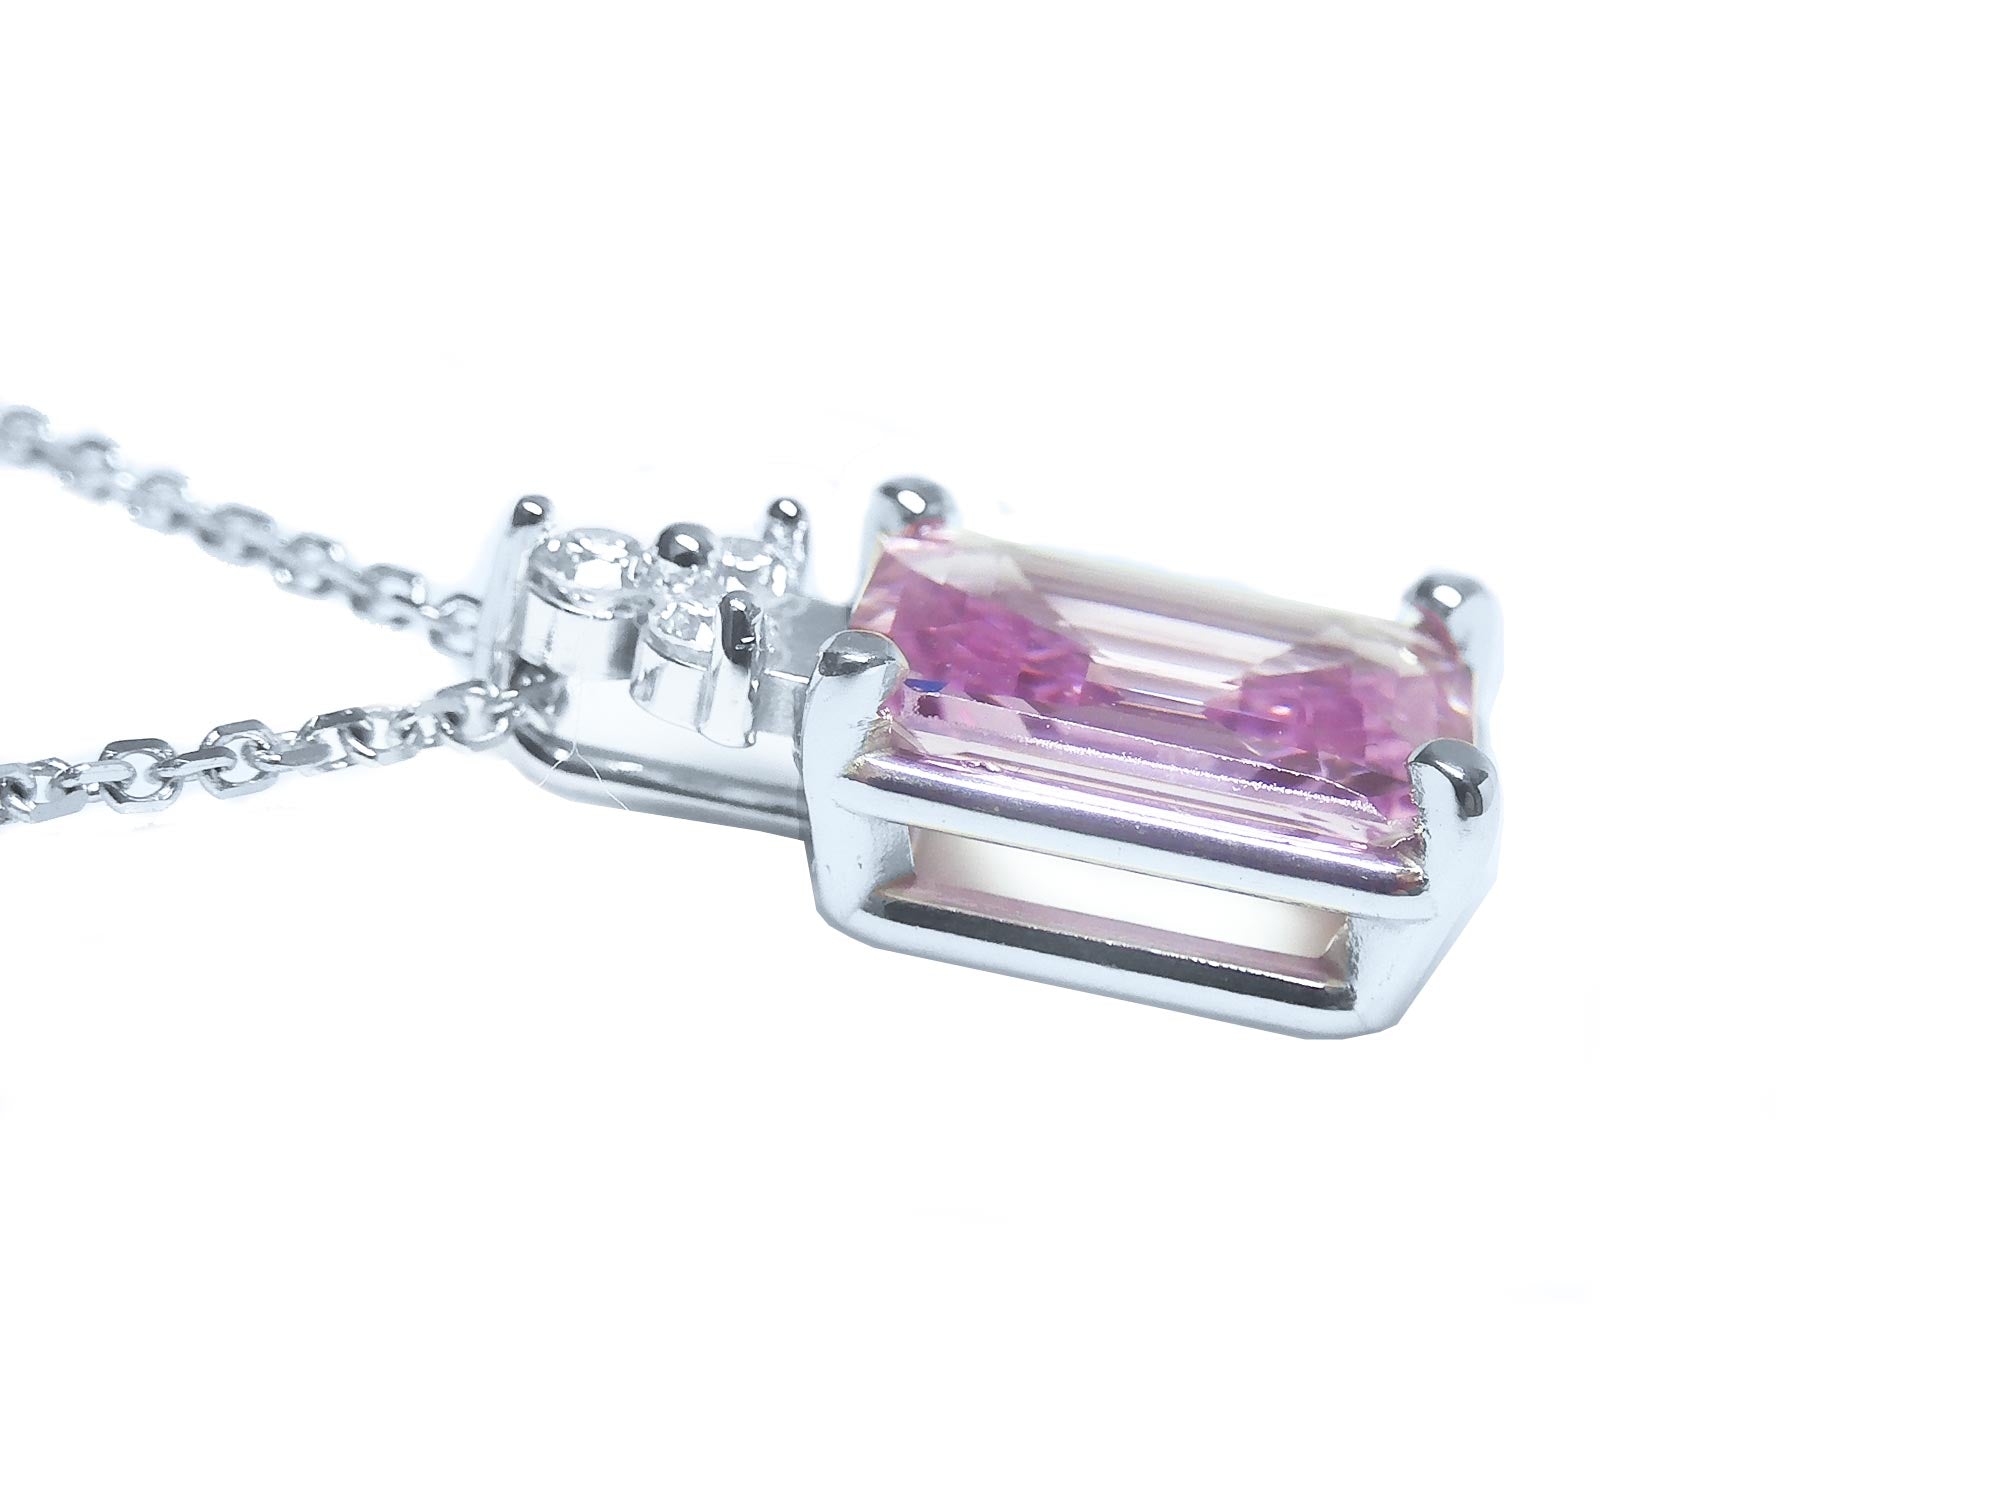 pink sapphire necklace